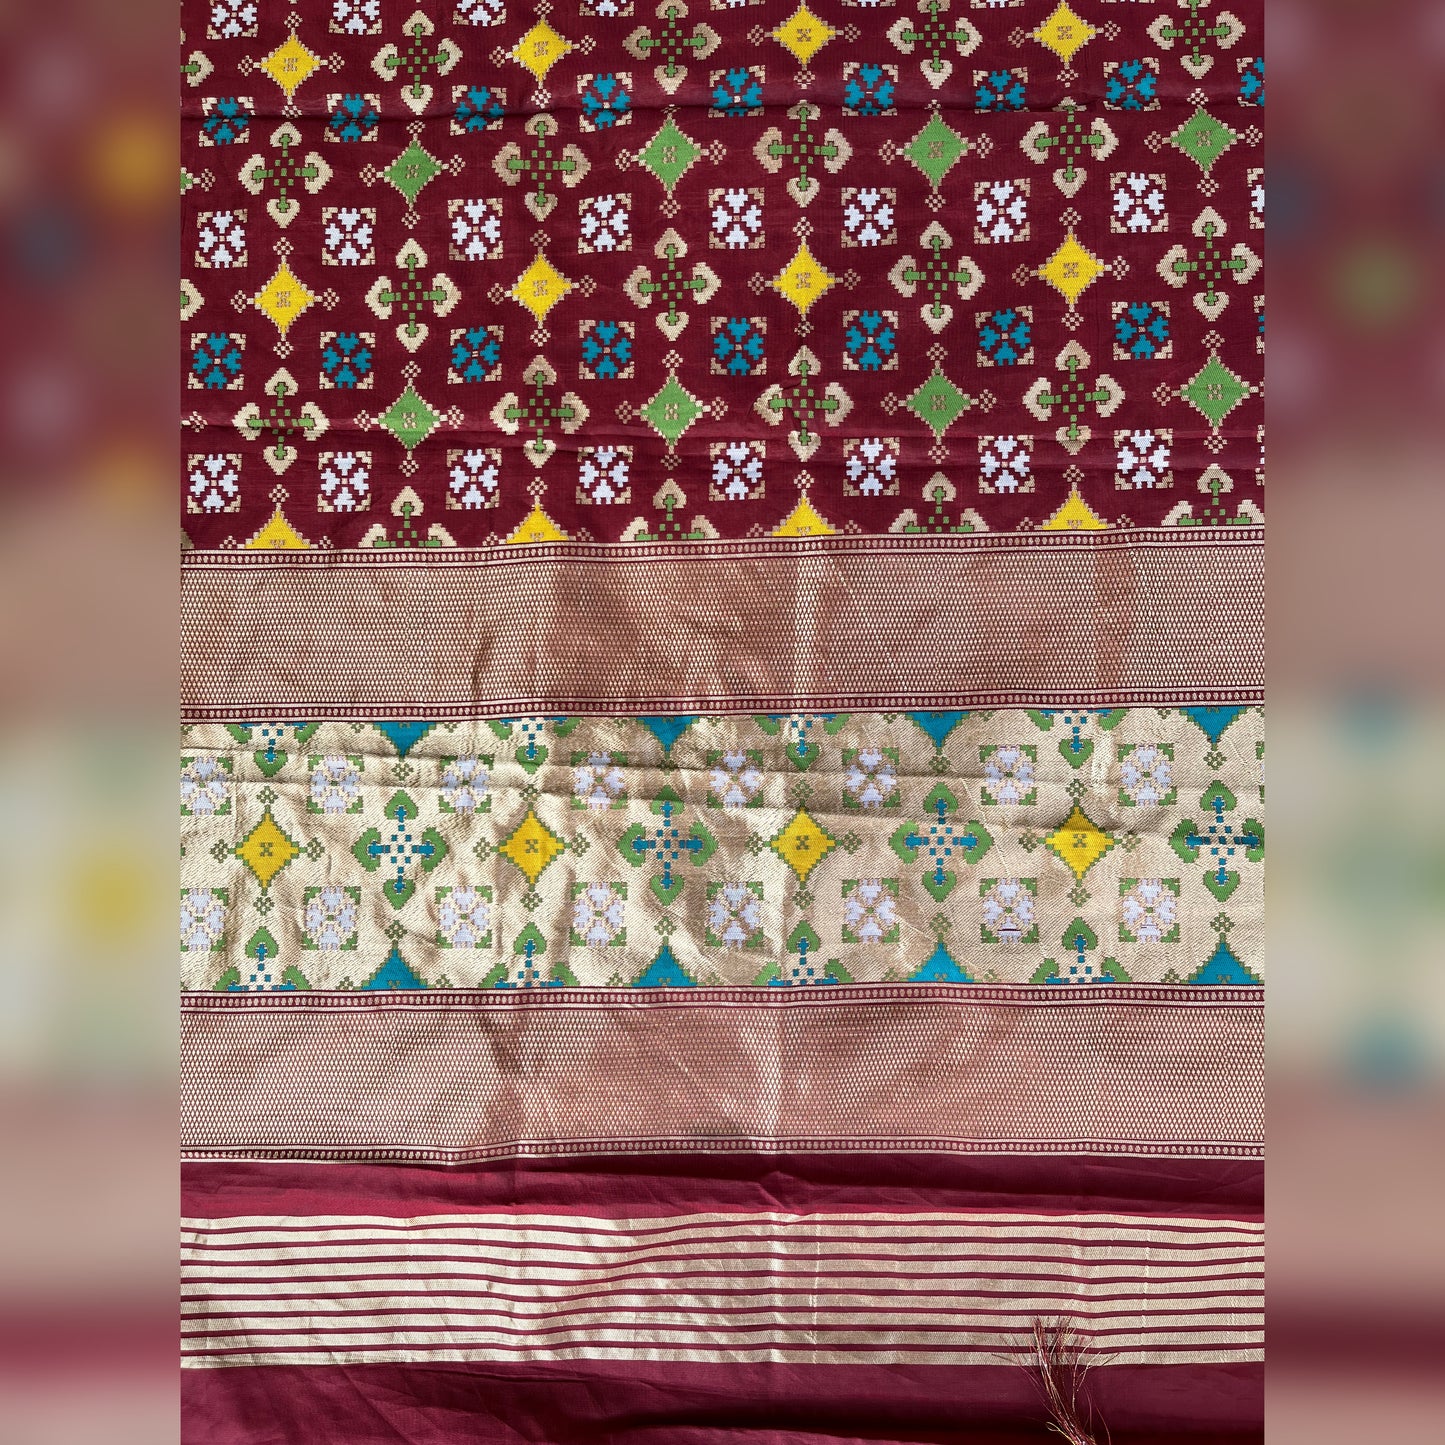 Woven Cotton Silk Patola Dupatta - Maroon and Gold with multi coloured weave